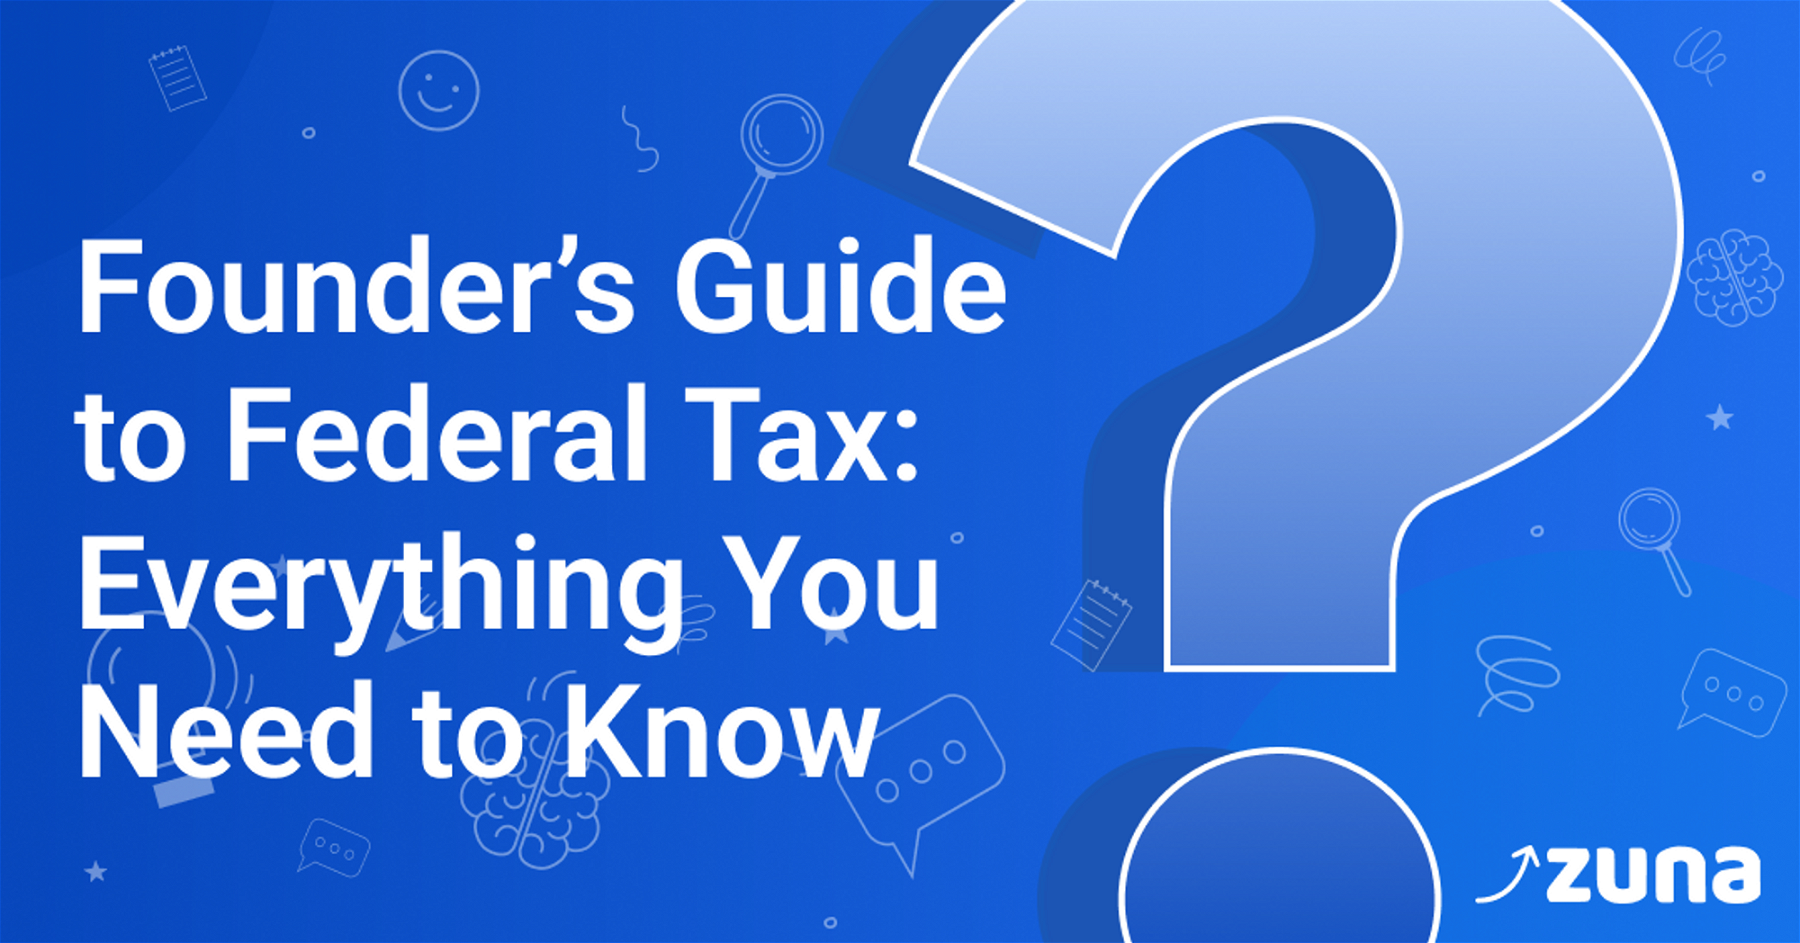 Founder’s Guide to Federal Tax: Everything You Need to Know